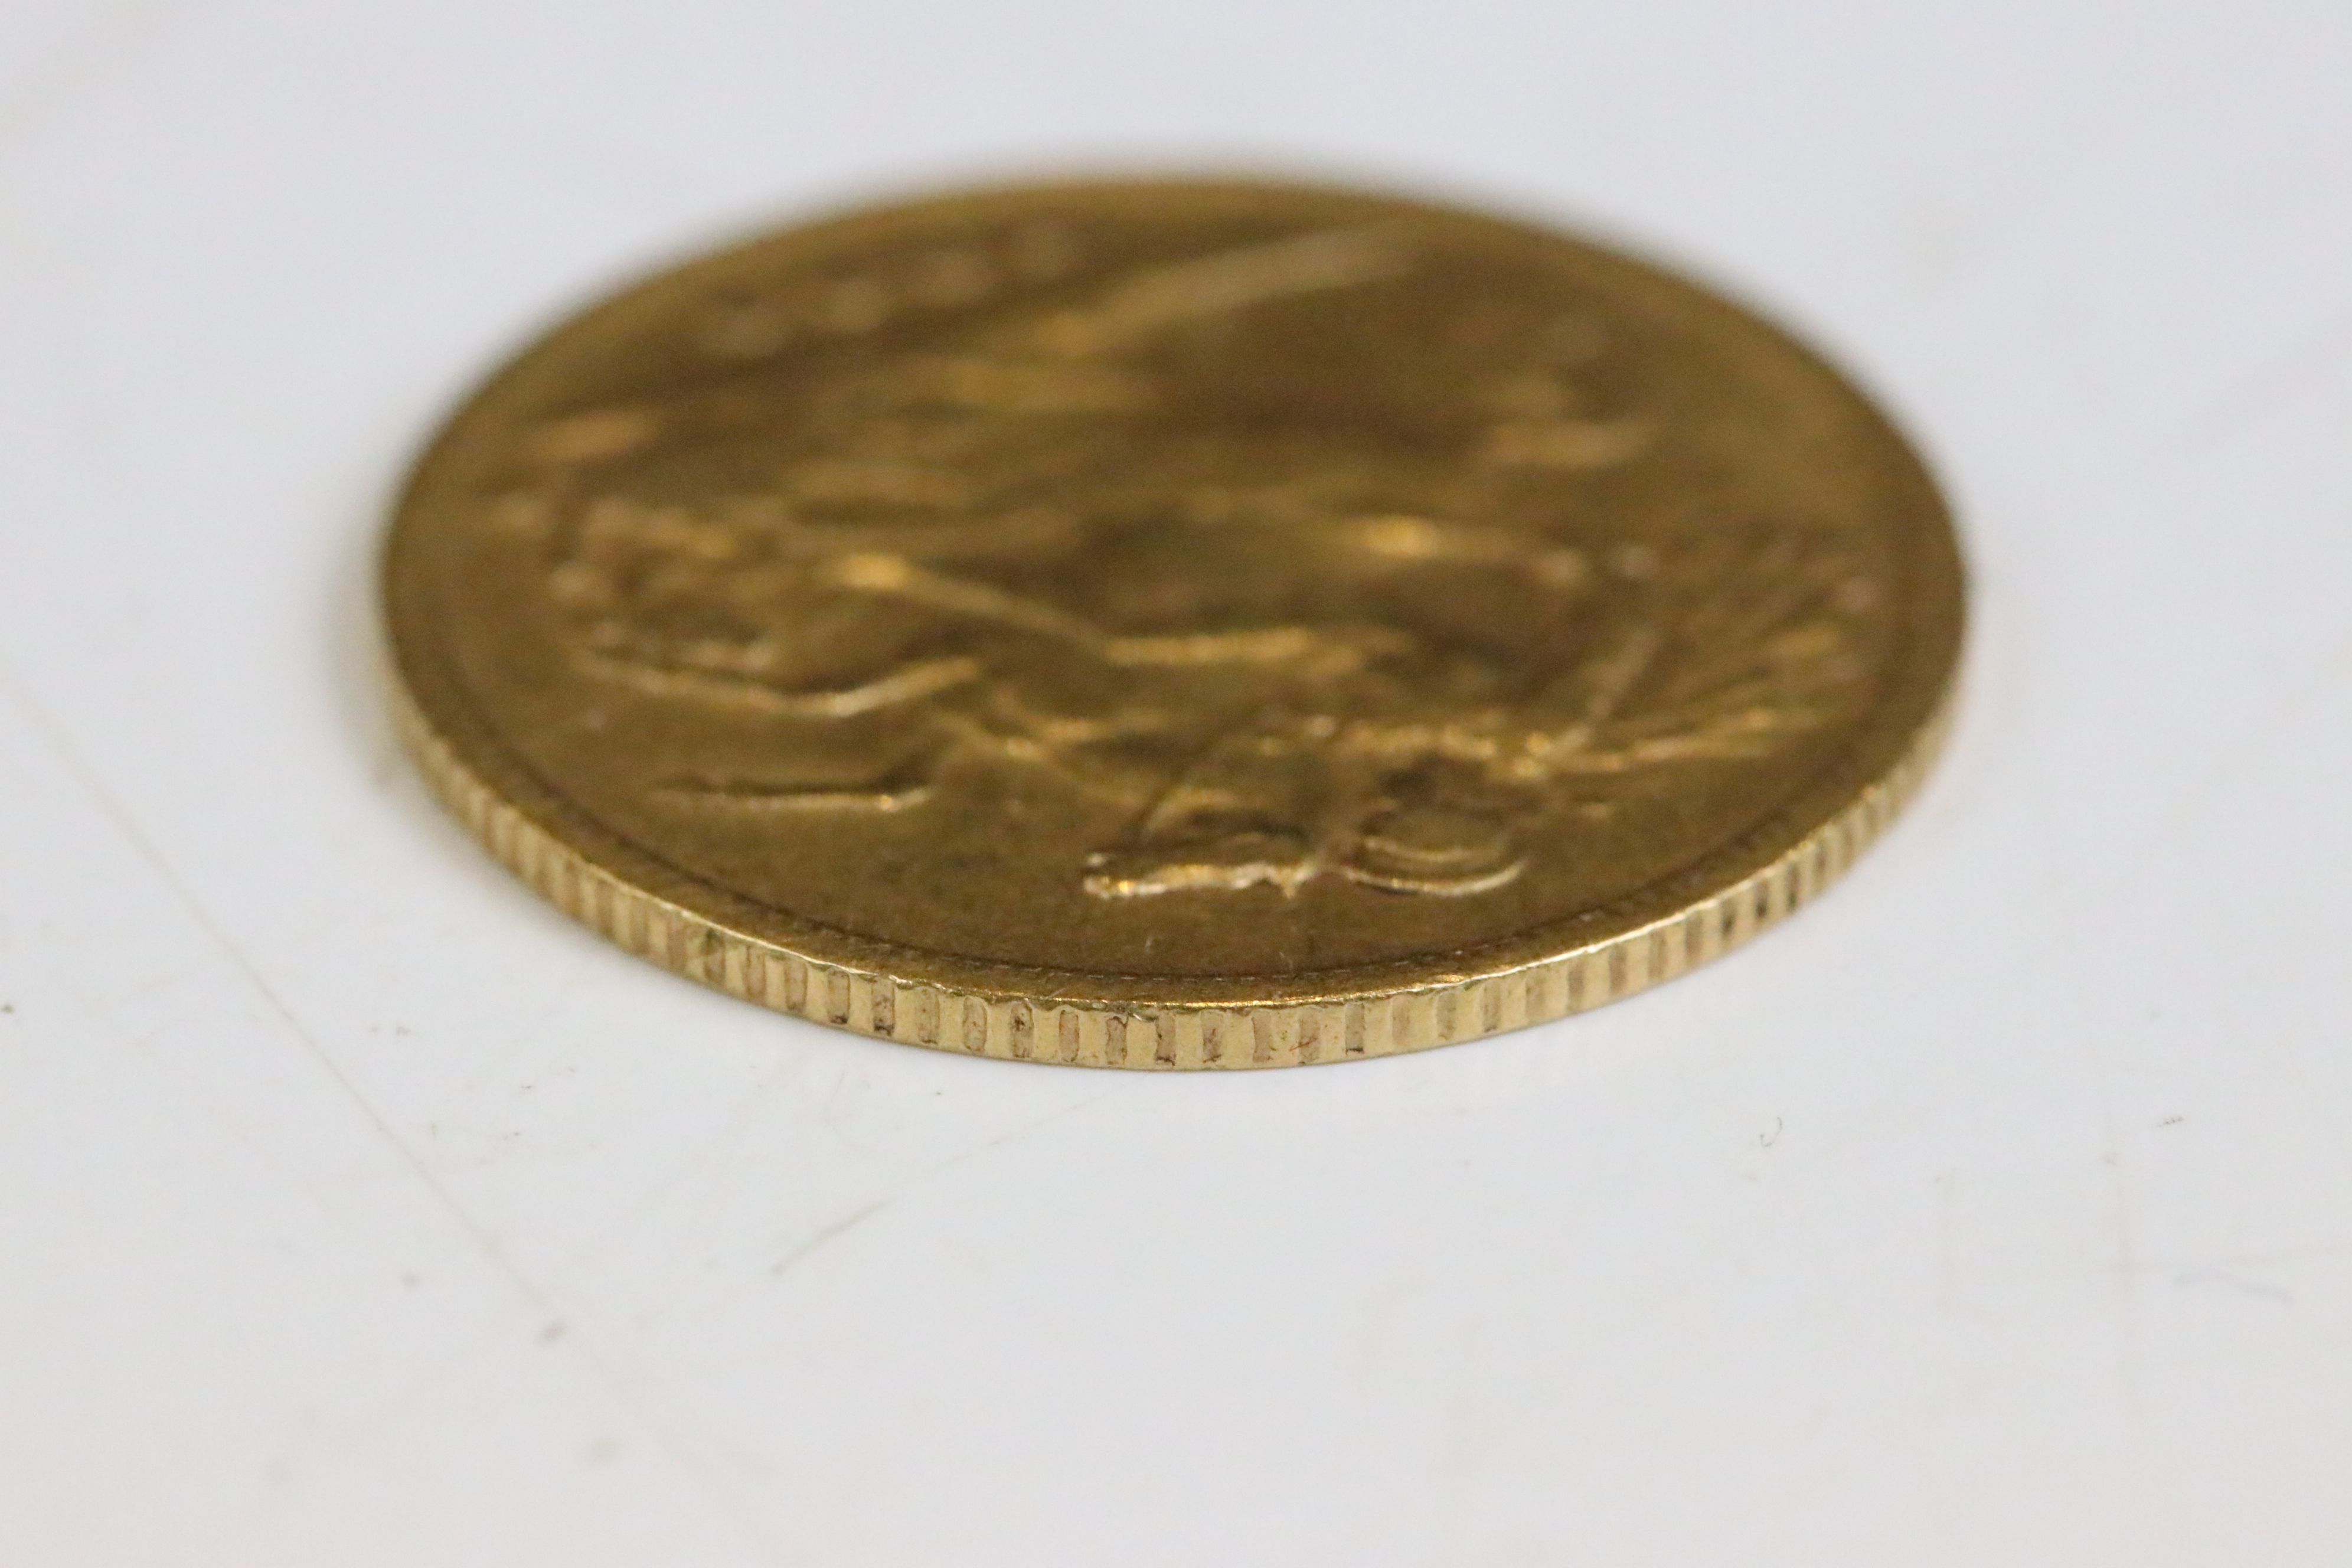 A British Queen Victoria gold half sovereign coin, dated 1900. - Image 3 of 3